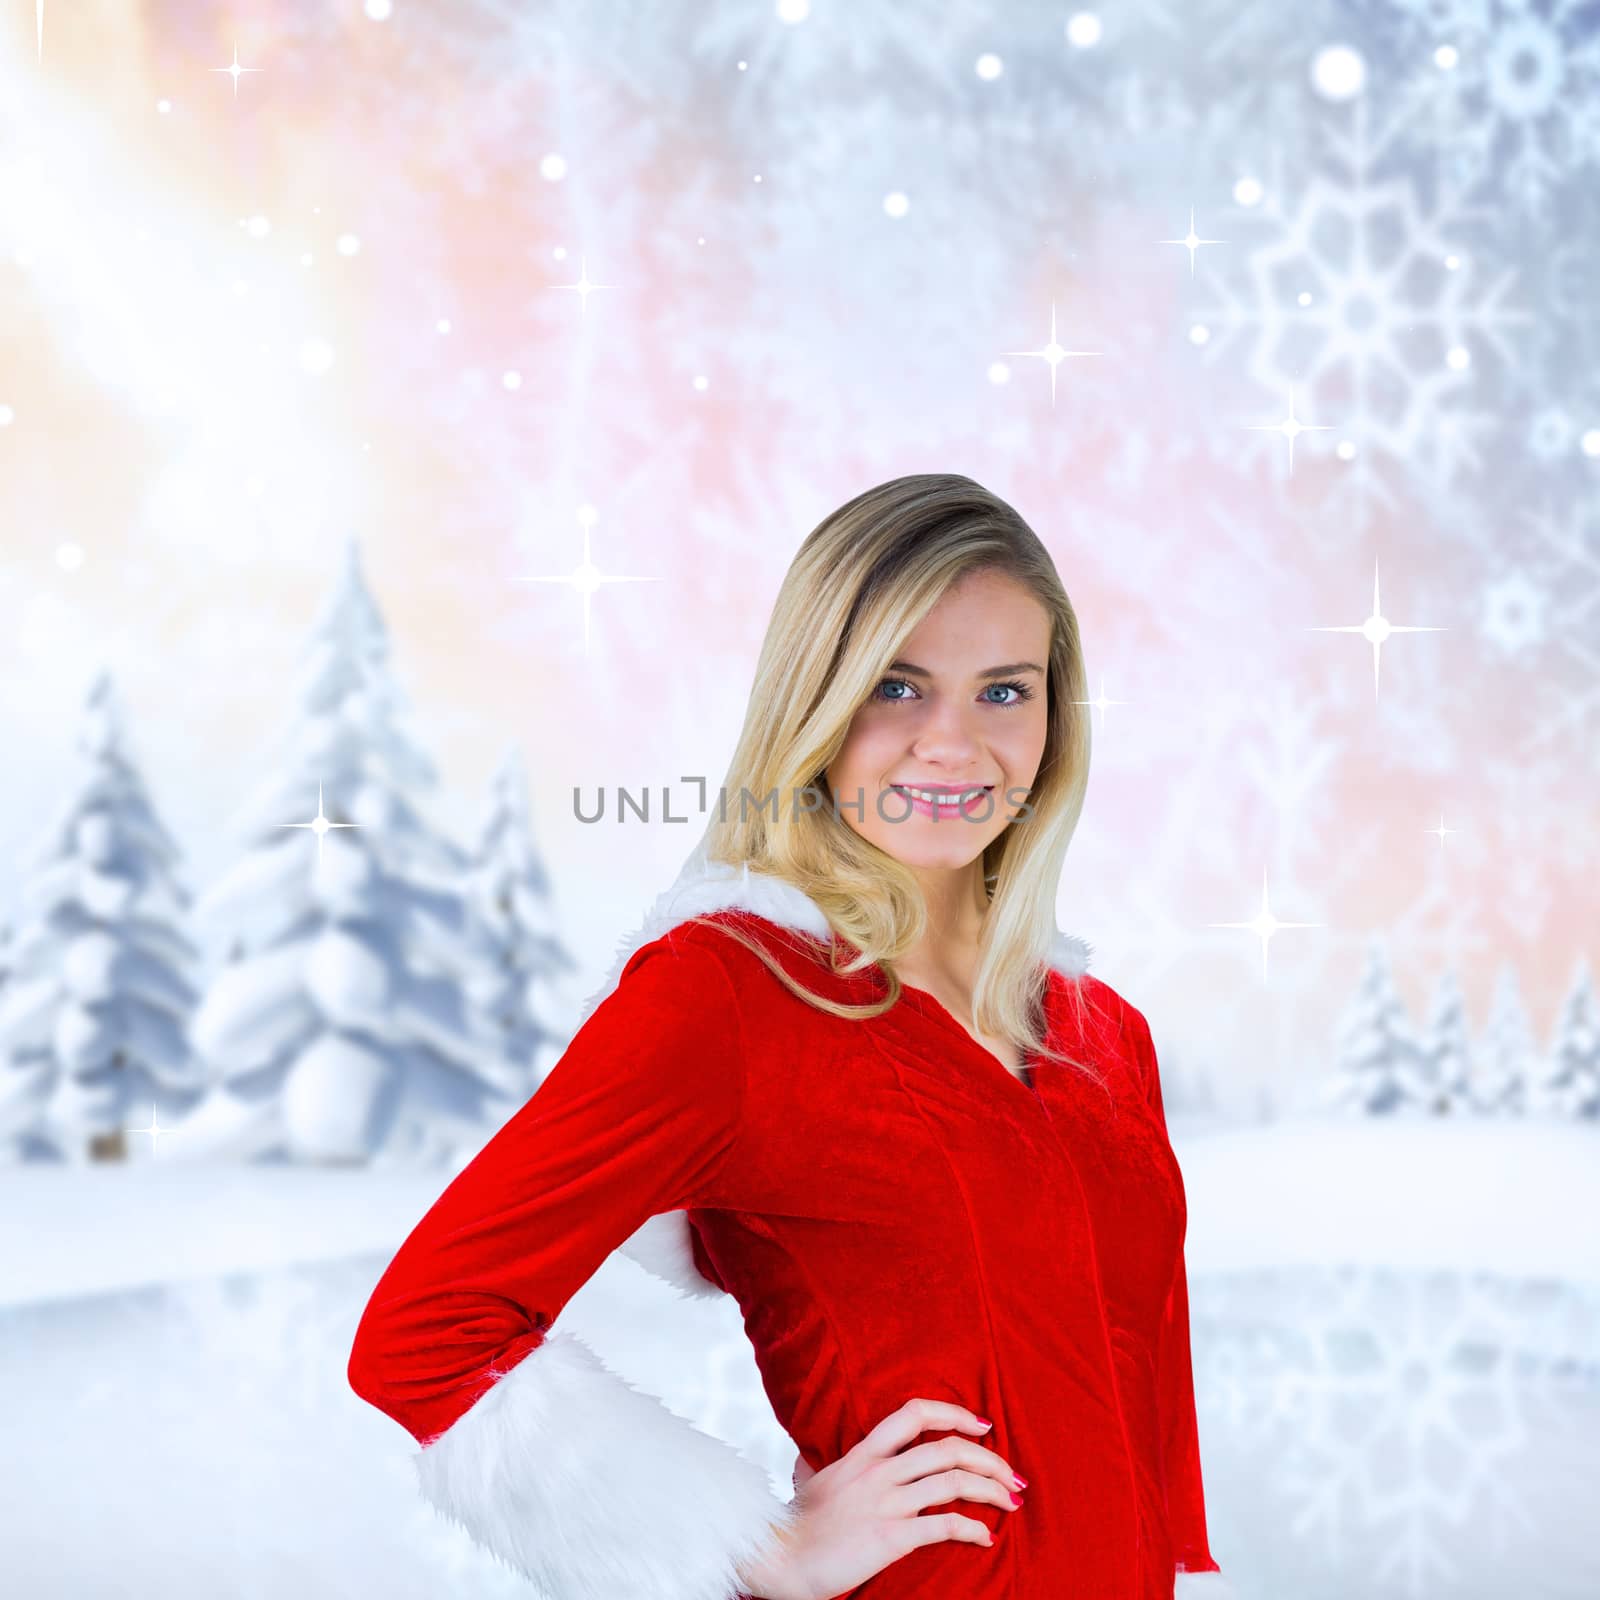 Pretty girl smiling in santa outfit against snowy landscape with fir trees